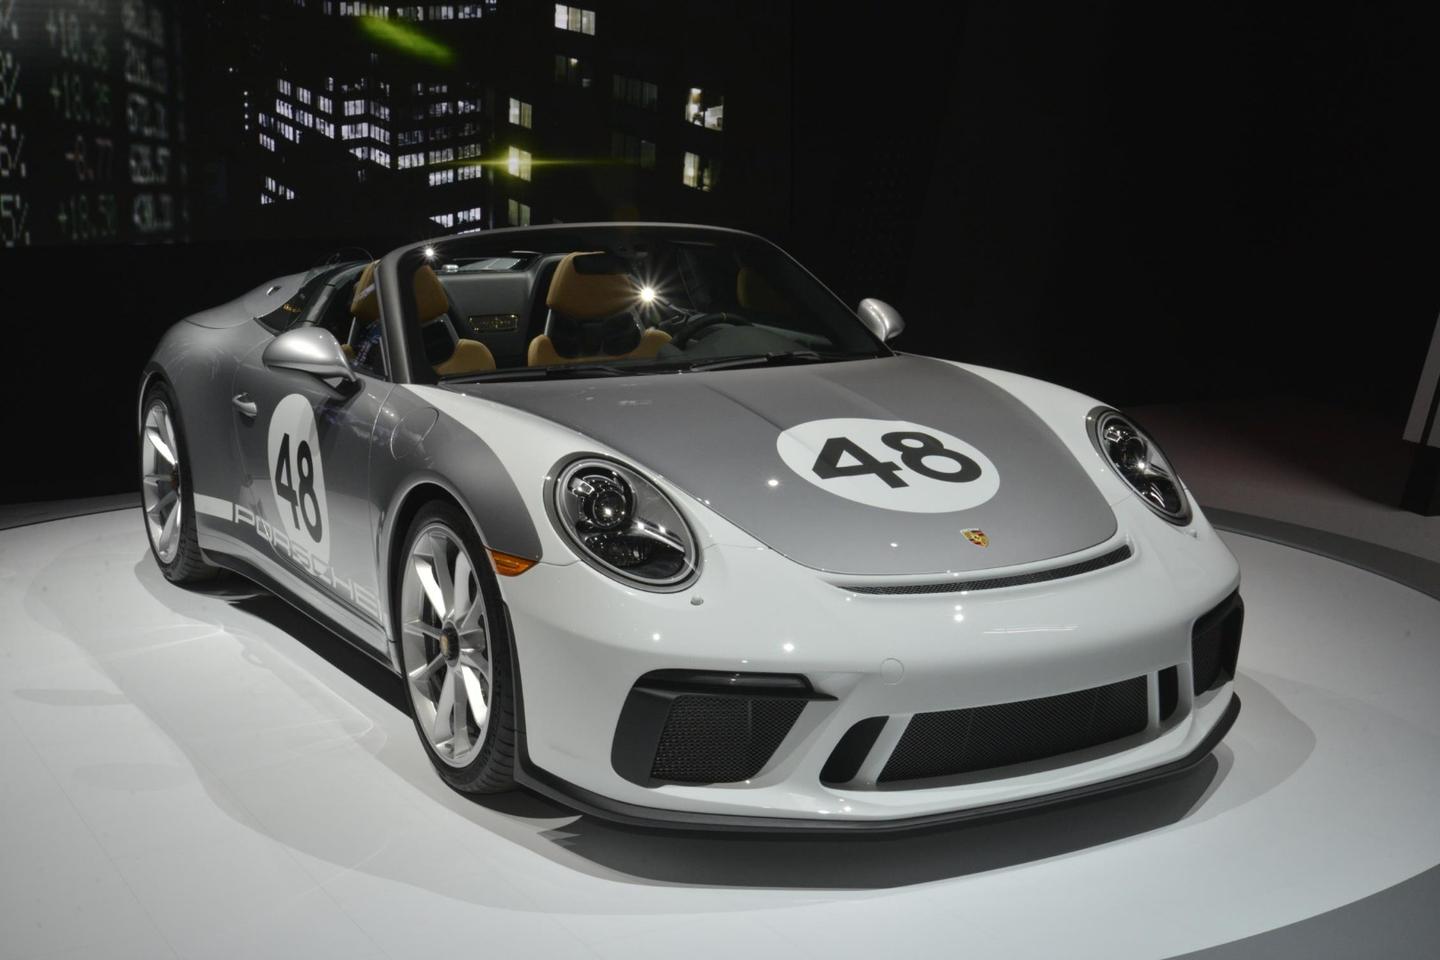 Available for the 911 Speedster, the Heritage Design Package adds Gumball-style graphics inspired by historic 356 models